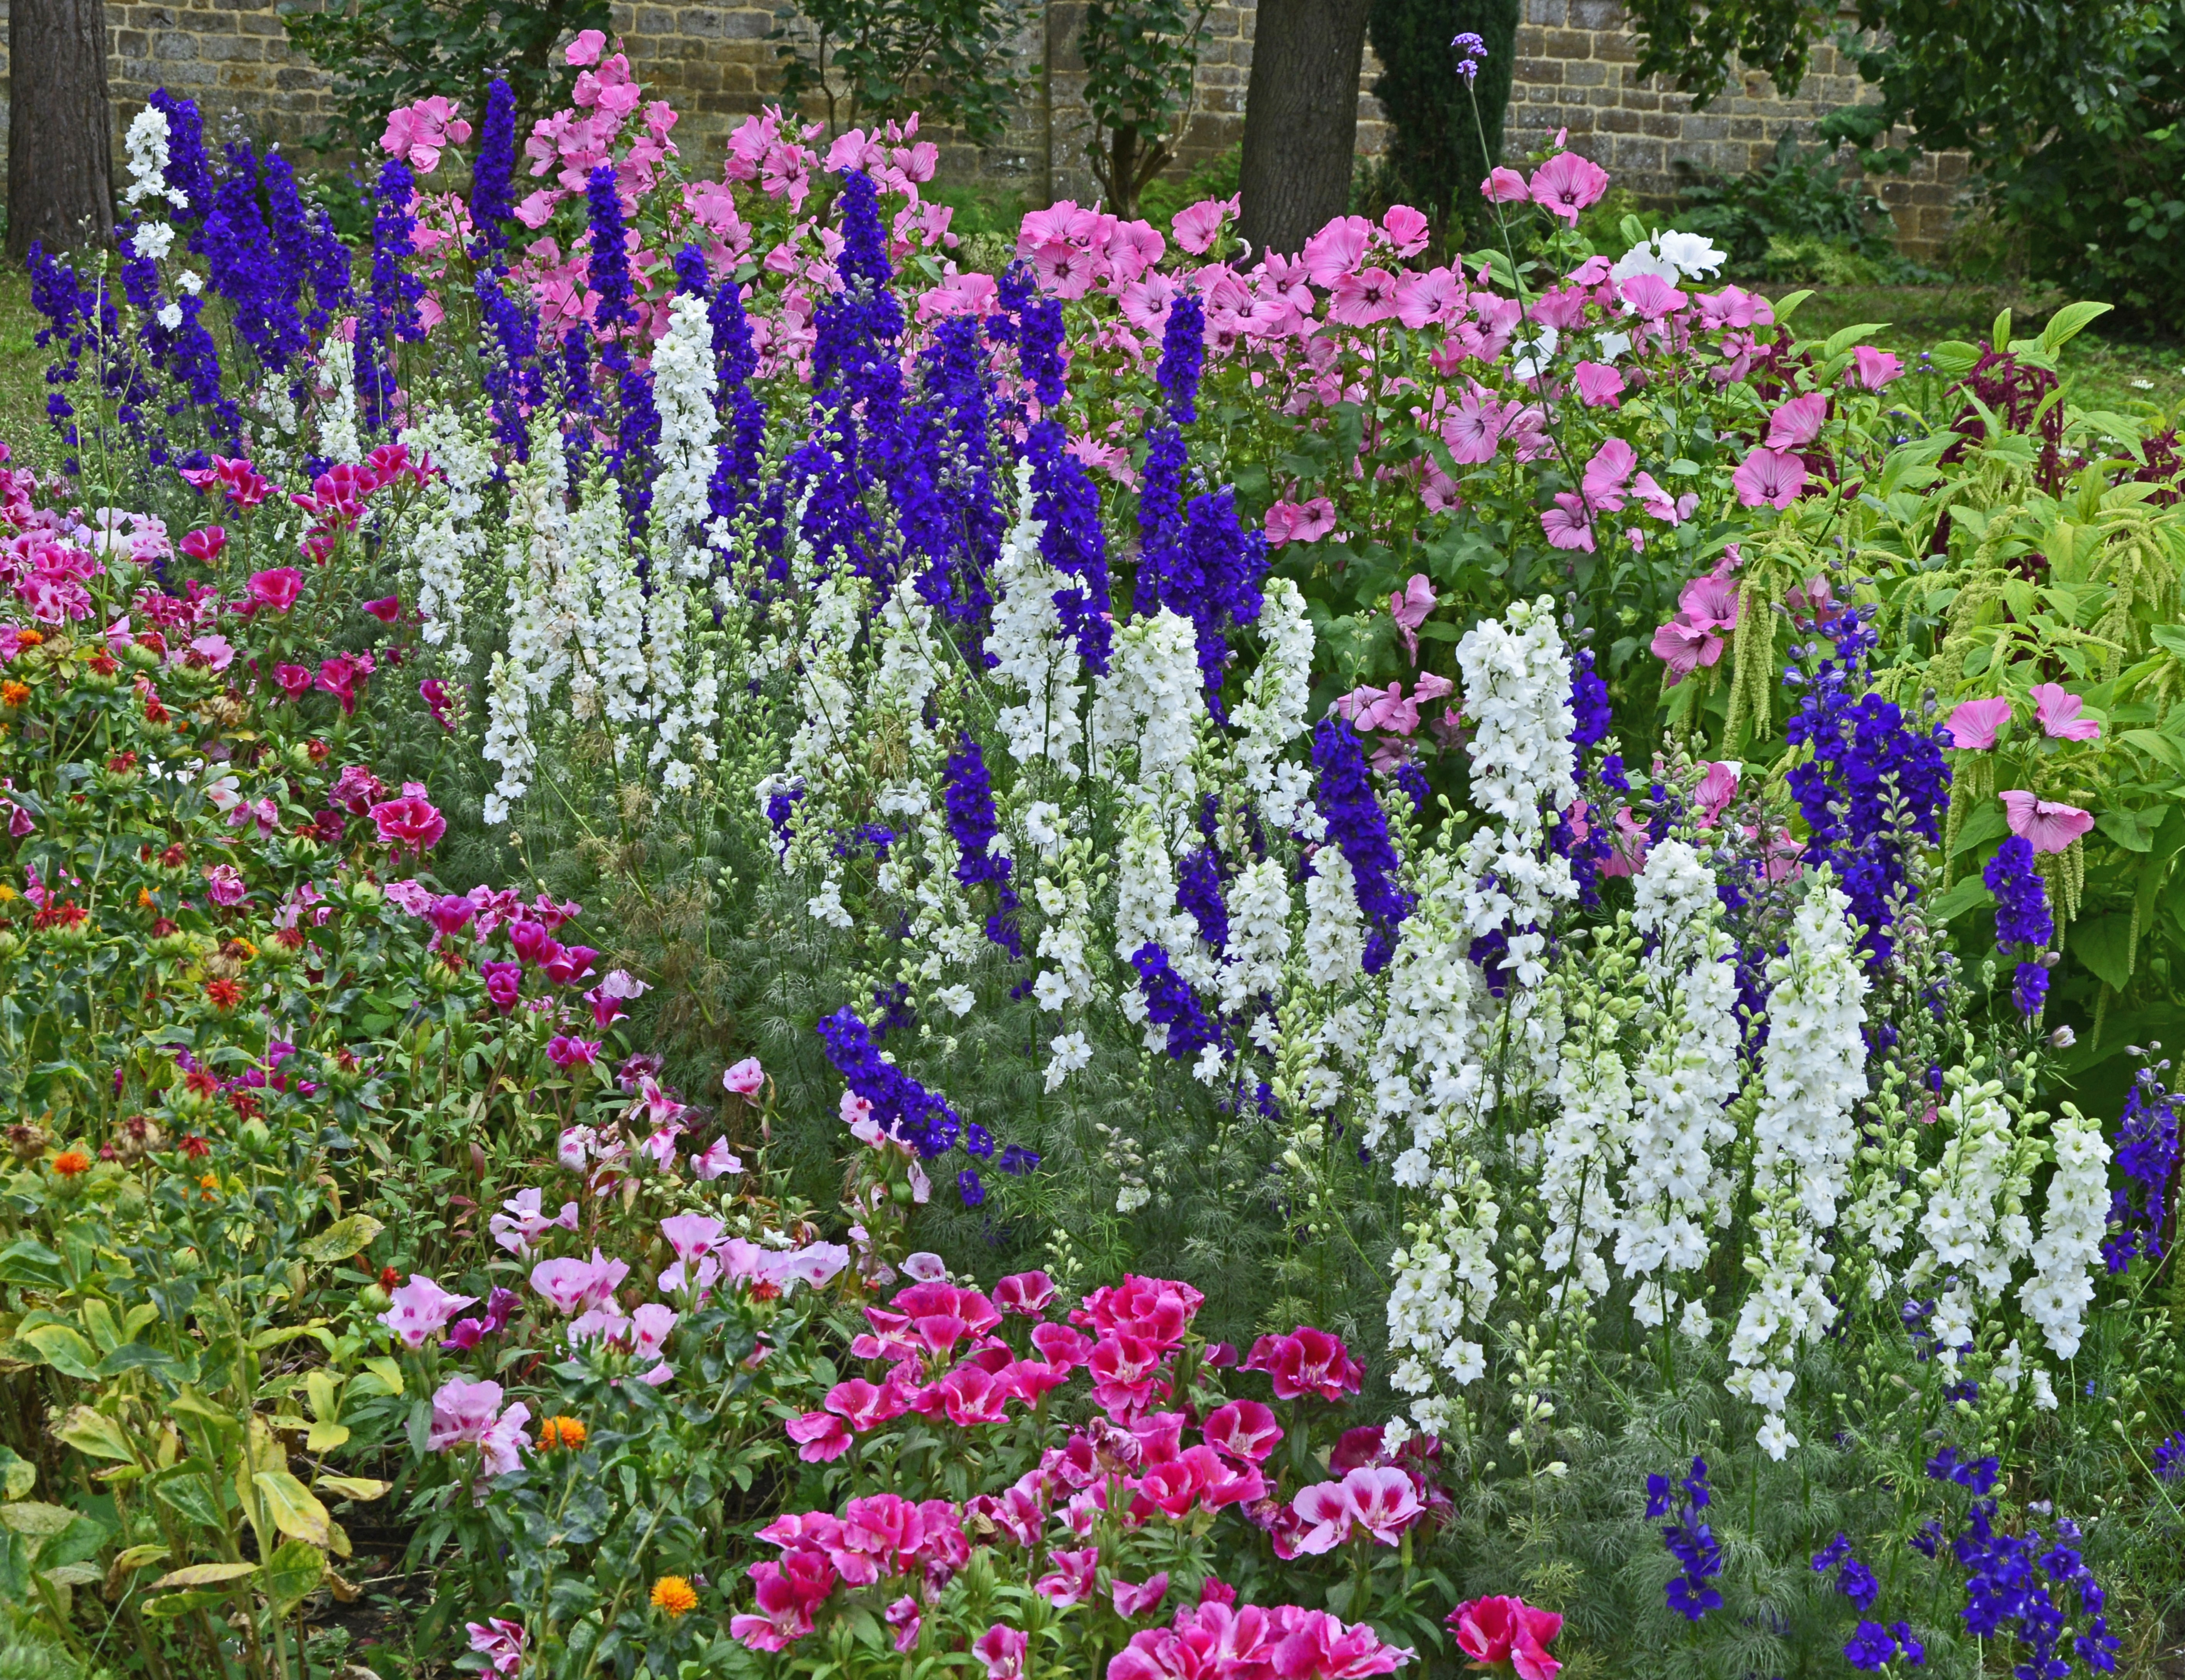 Colourful border with Delphinium consolida, Larkspur, Lavatera and Godetia flowers in a cottage garden